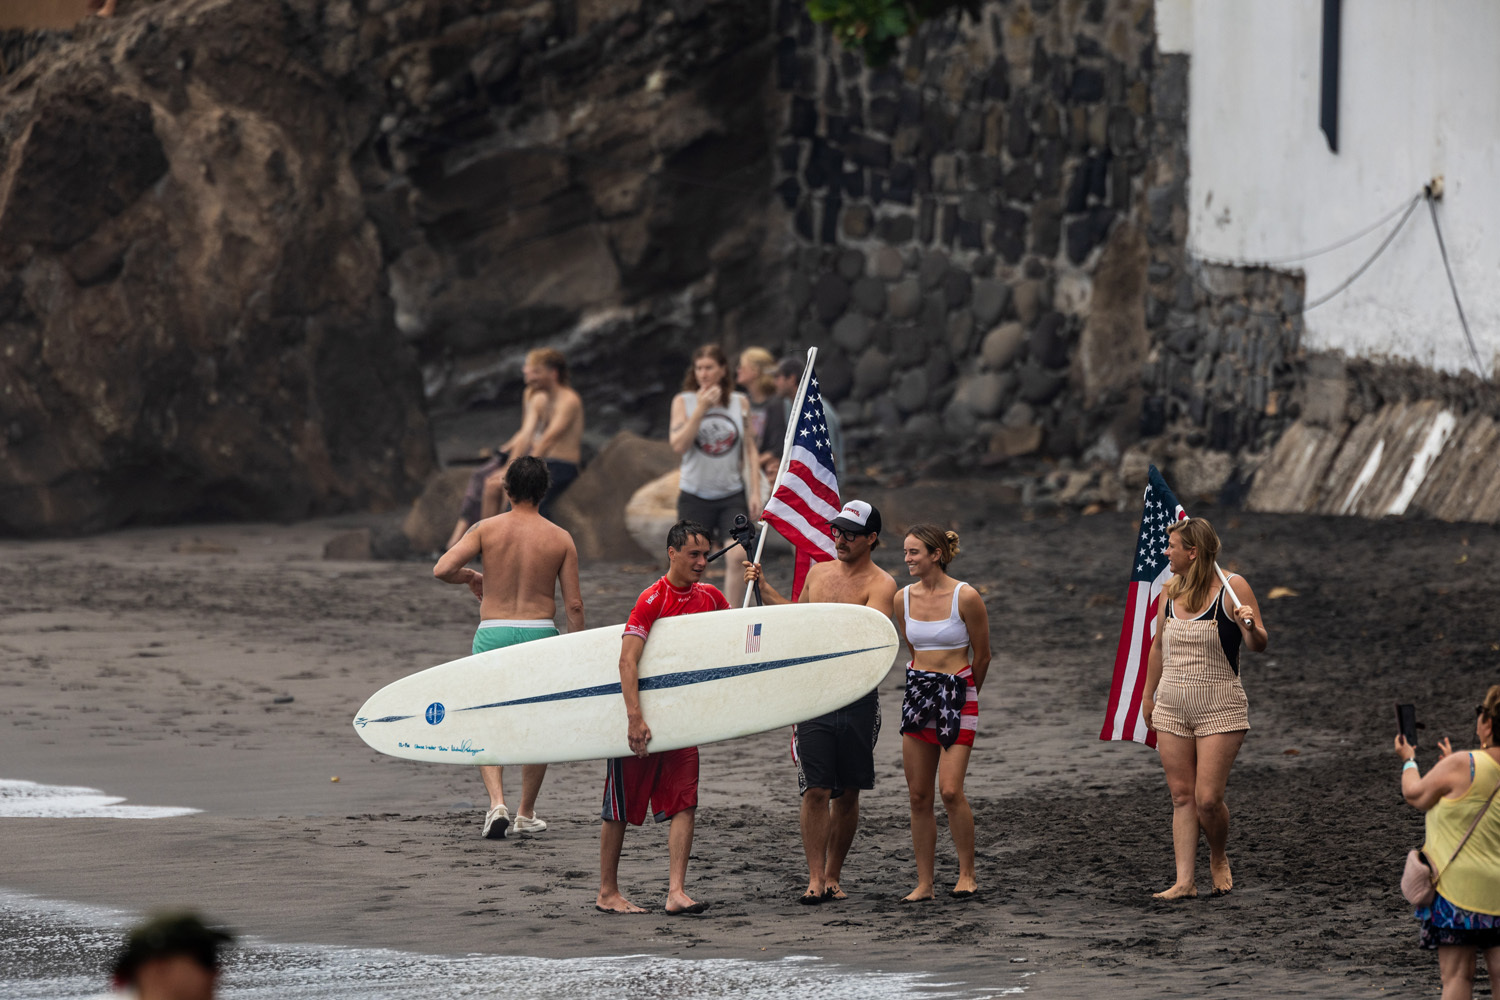 Montauk resident Chase Lieder, 18, helped Team USA to a fifth-place finish out of 39 countries at the ISA World Longboard Championships held in El Sunzal, El Salvador, on April 19-25. ISA/JERSSON BARBOZA